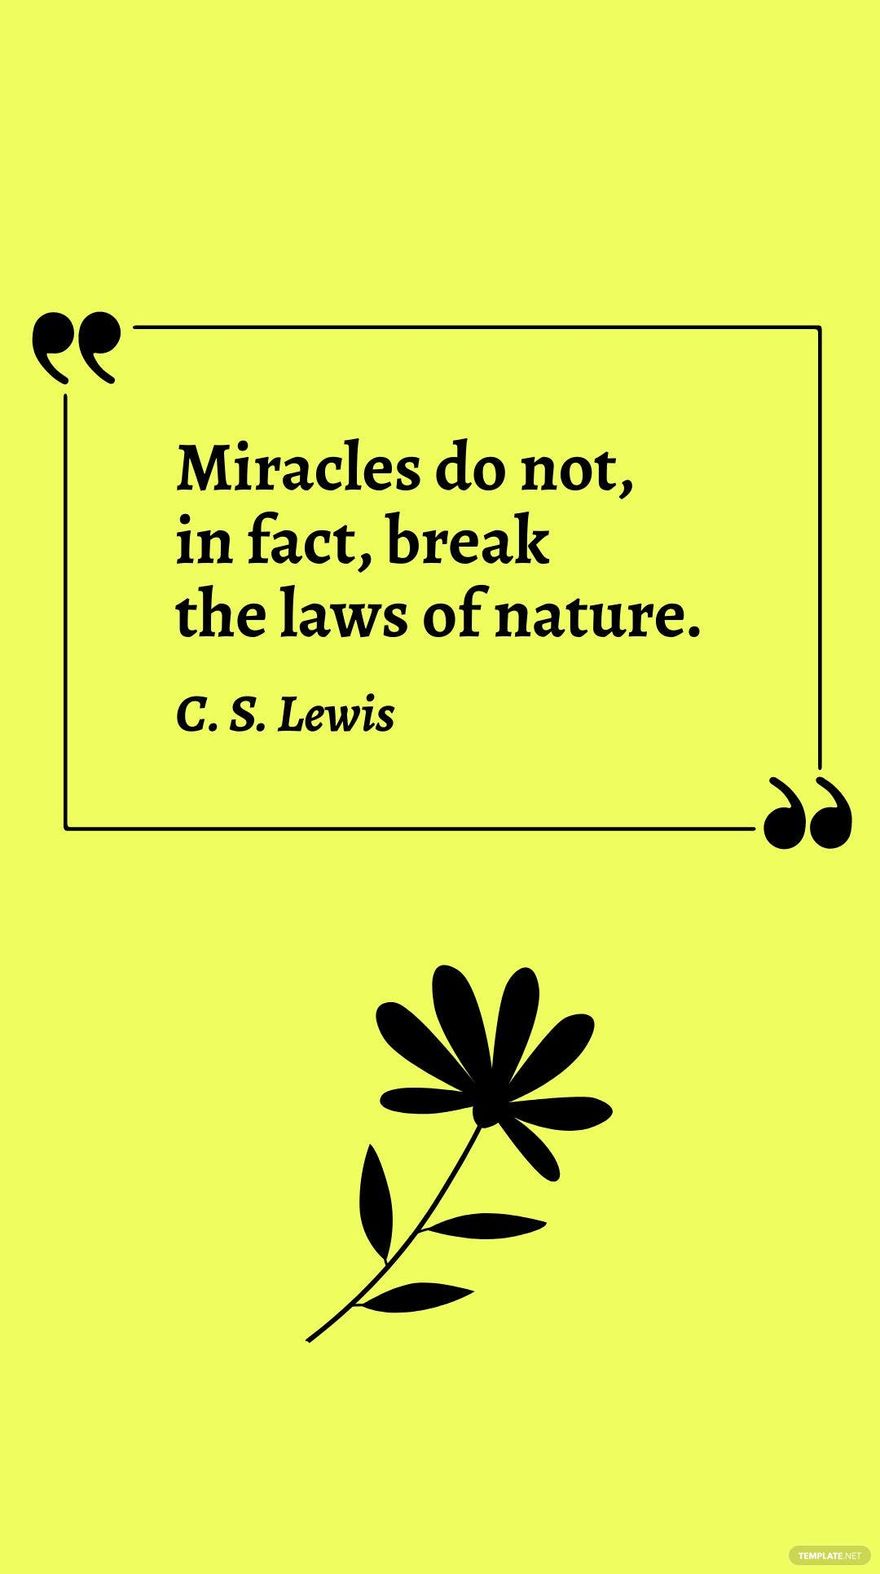 Free C. S. Lewis - Miracles do not, in fact, break the laws of nature. in JPG